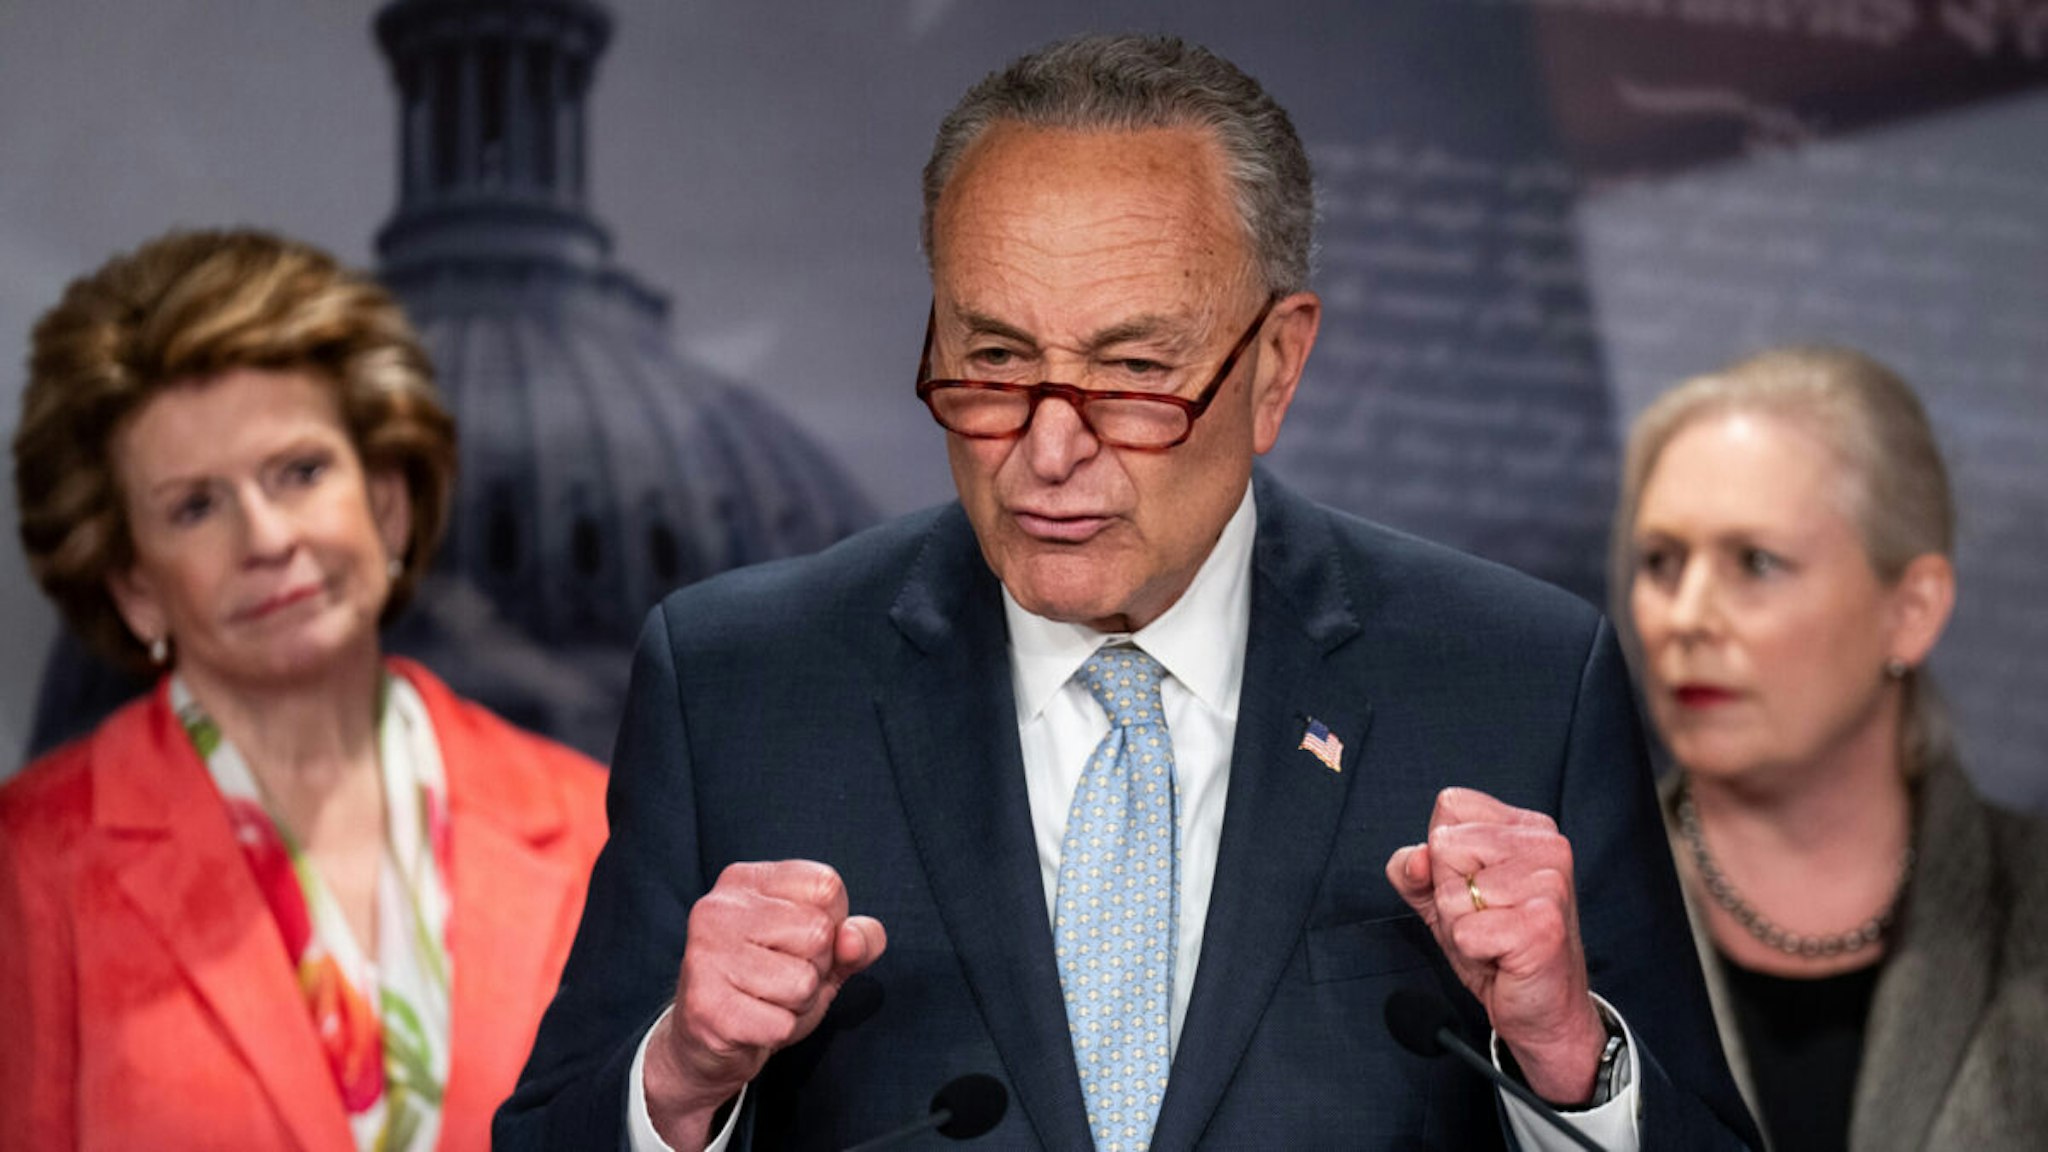 Senate Majority Leader Chuck Schumer, D-N.Y., flanked from left by Sen. Debbie Stabenow, D-Mich., and Sen. Kirsten Gillibrand, D-N.Y., holds a news conference on Thursday, May 5, 2022, to announce the Senate will vote on the Women's Health Protection Act of 2022.